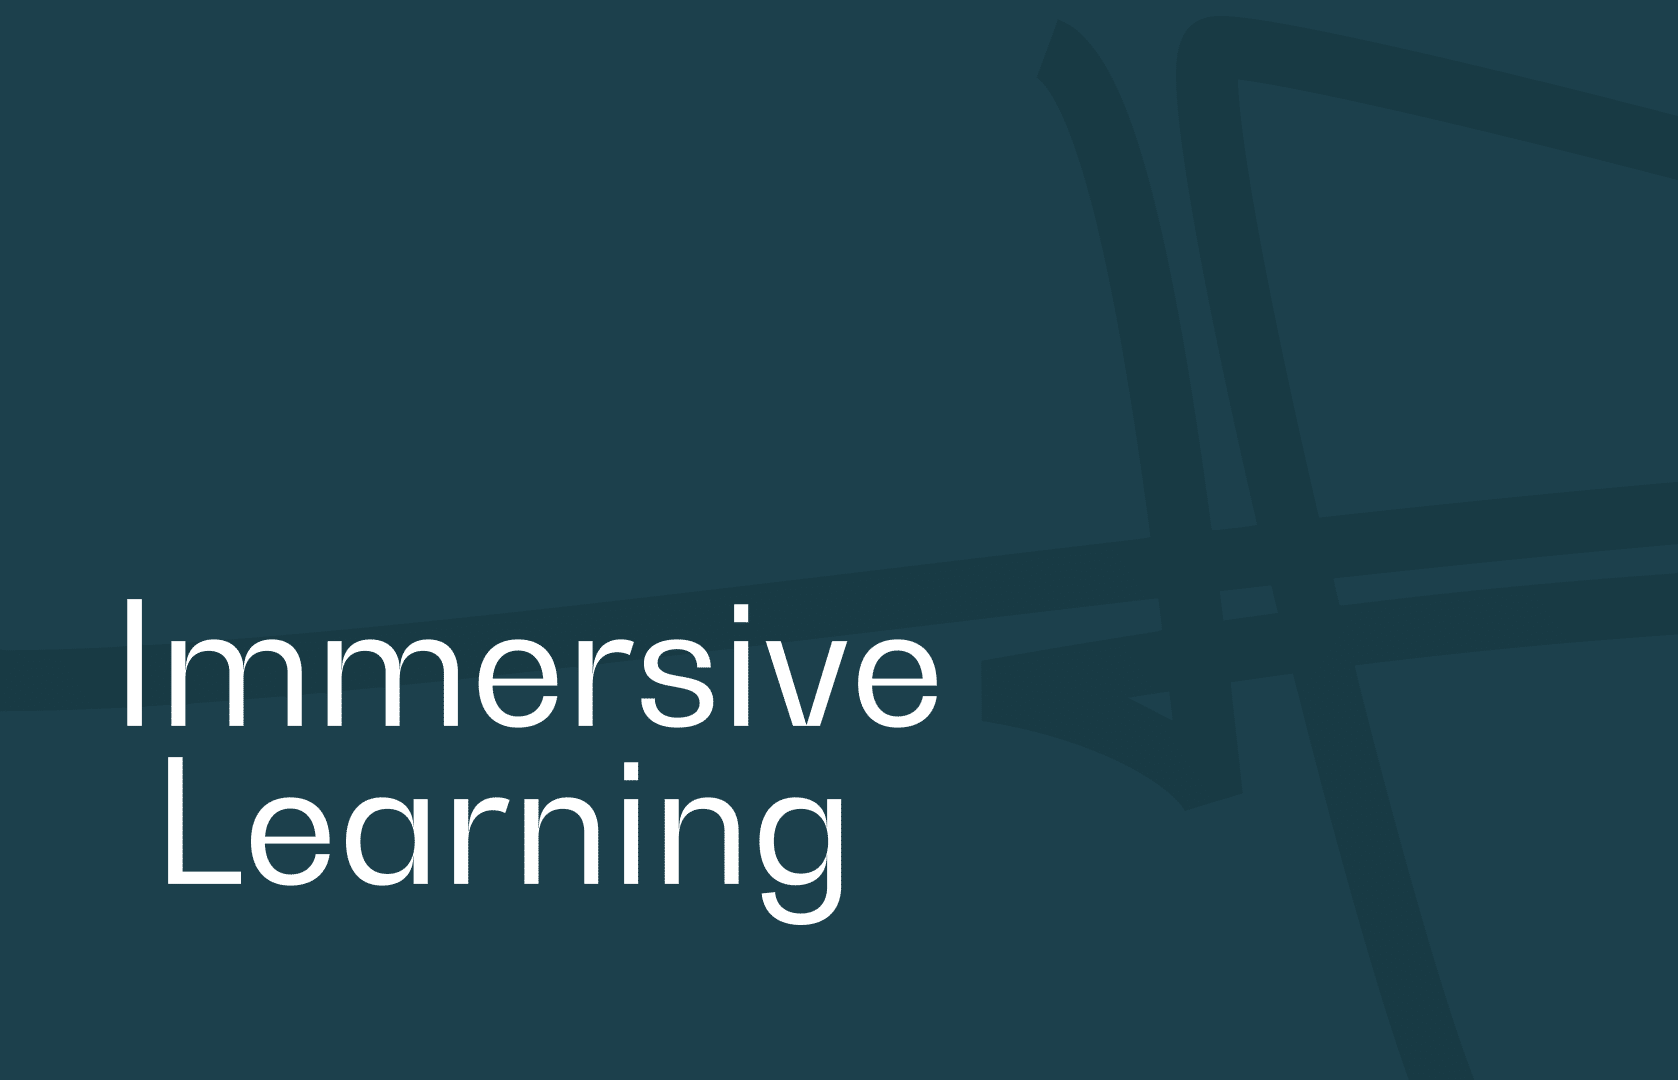 Immersive Learning definition